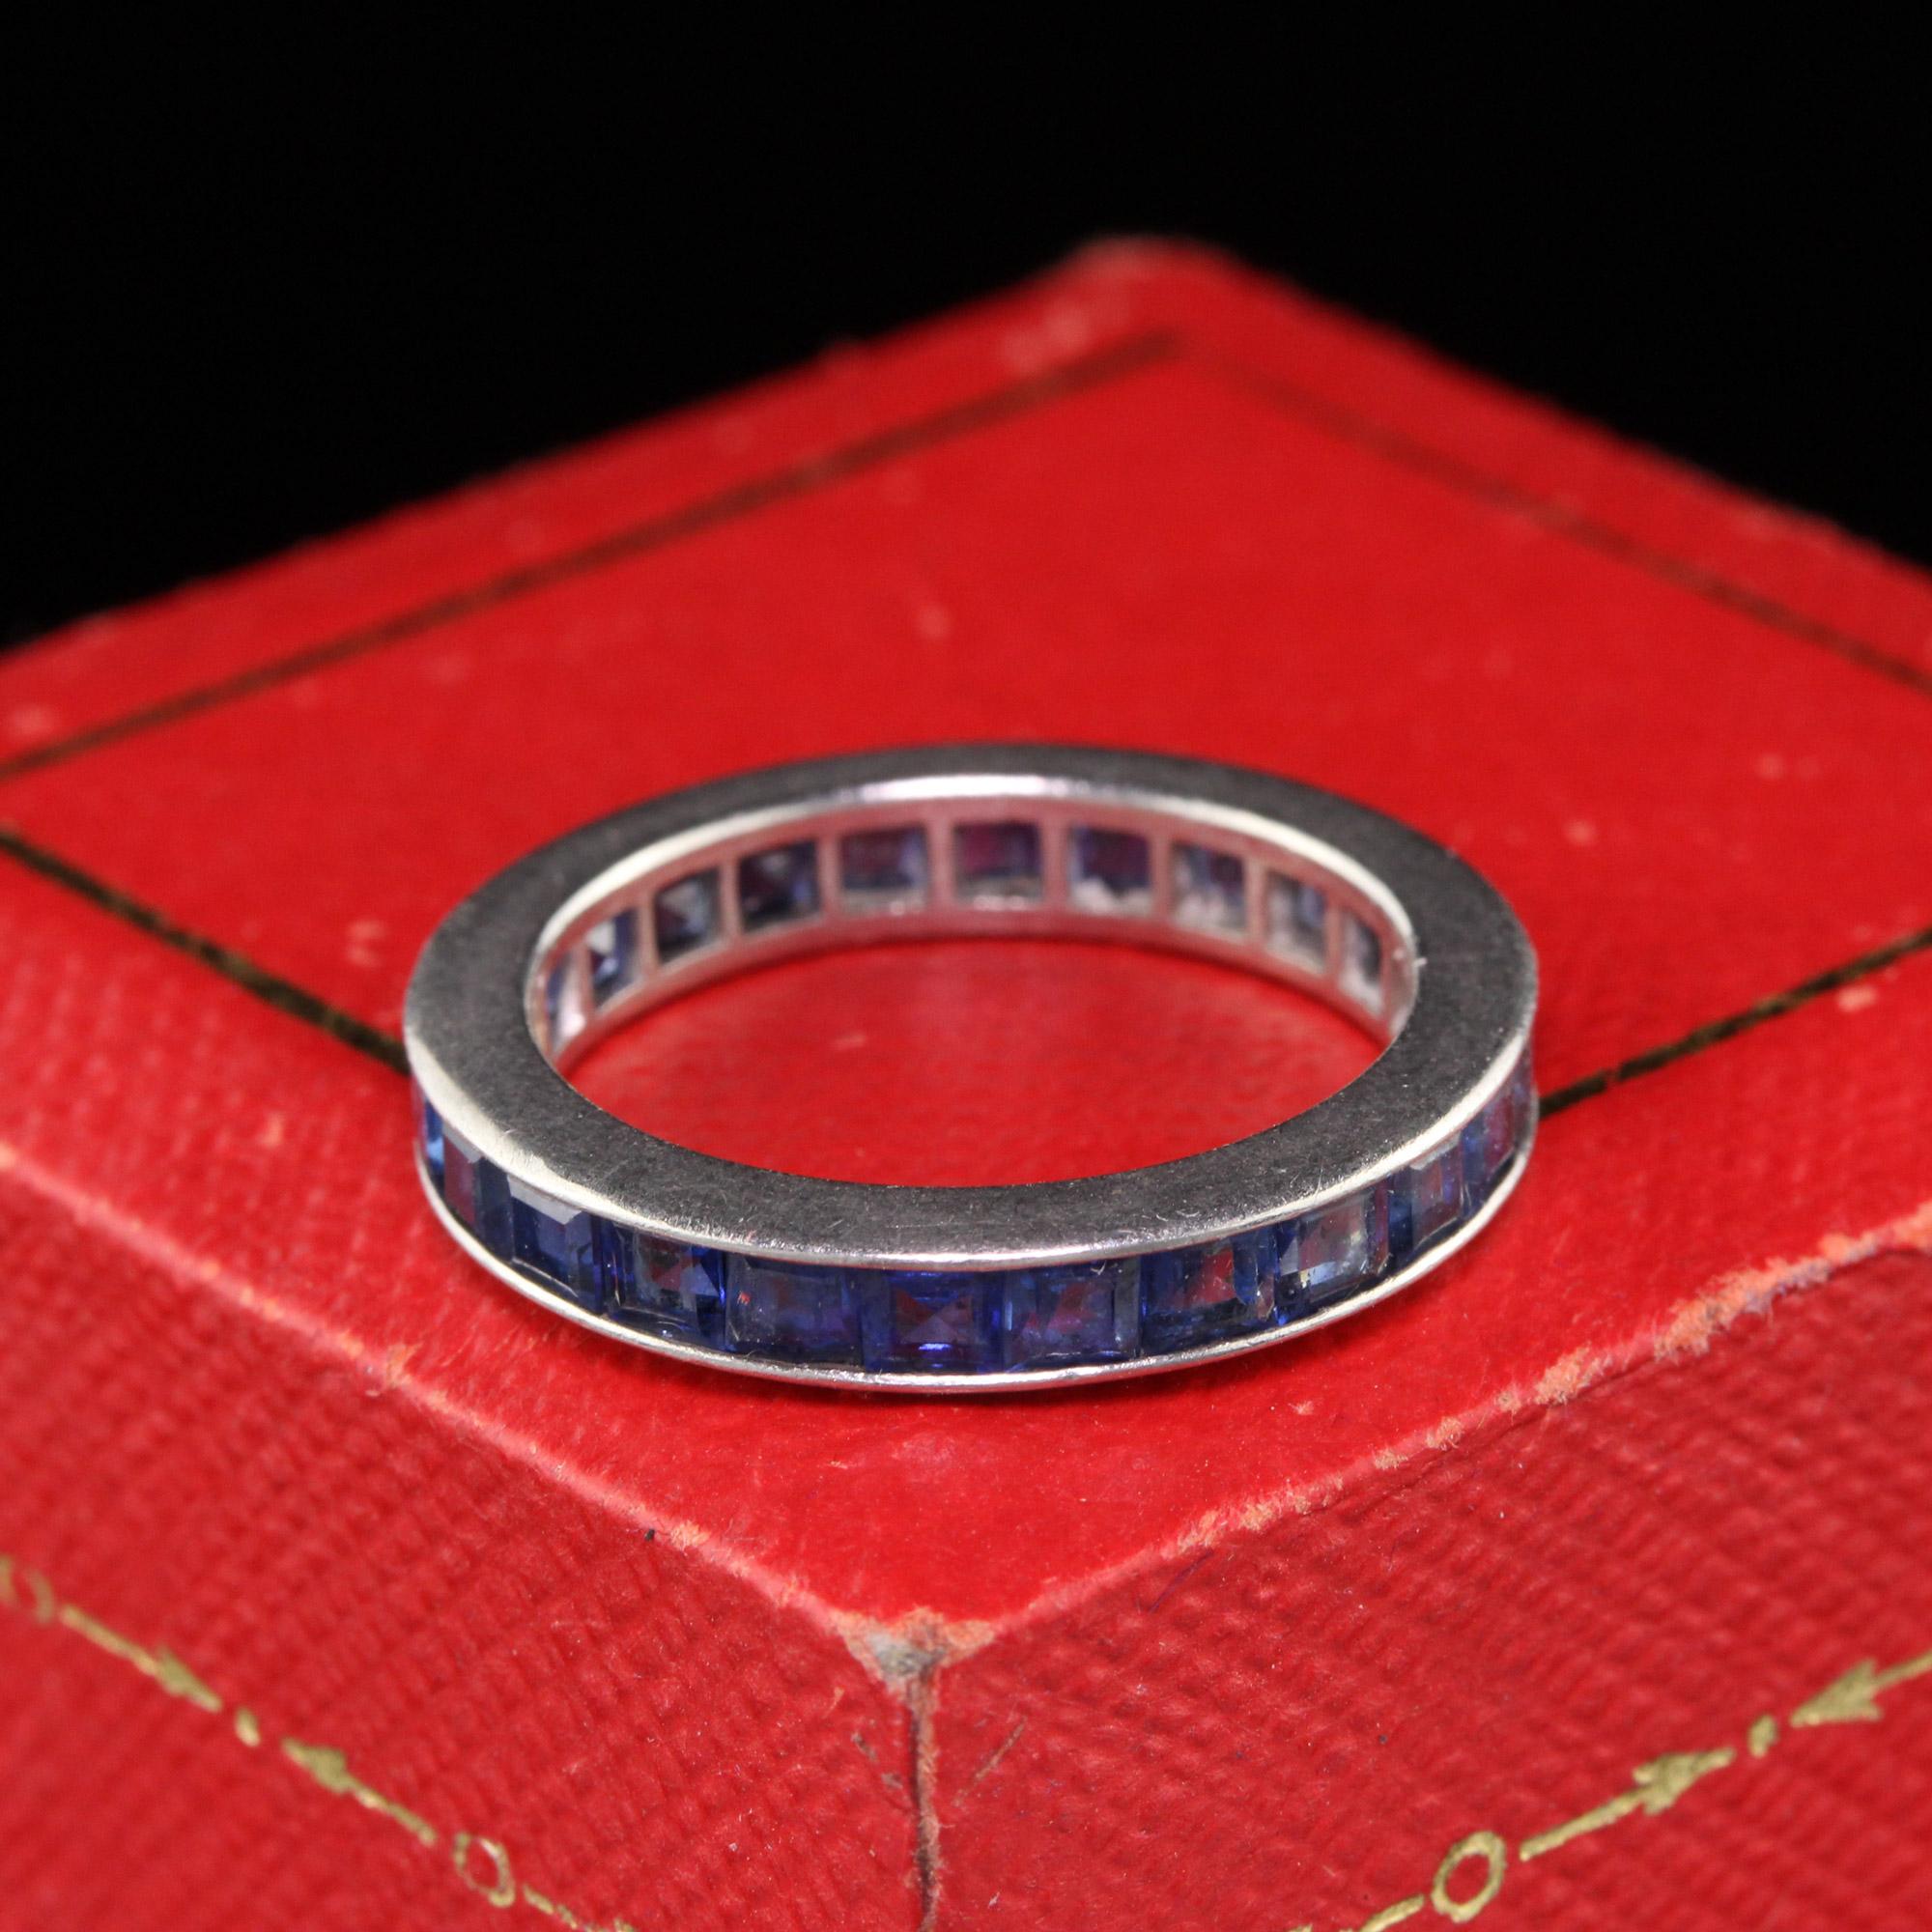 Beautiful classic Art Deco eternity band done in platinum with sapphires. The sapphires are a beautiful shade of blue which create bright look. The ring is in good condition. 

#R0408

Metal: Platinum 

Weight: 4.5 Grams

Ring Size: 5